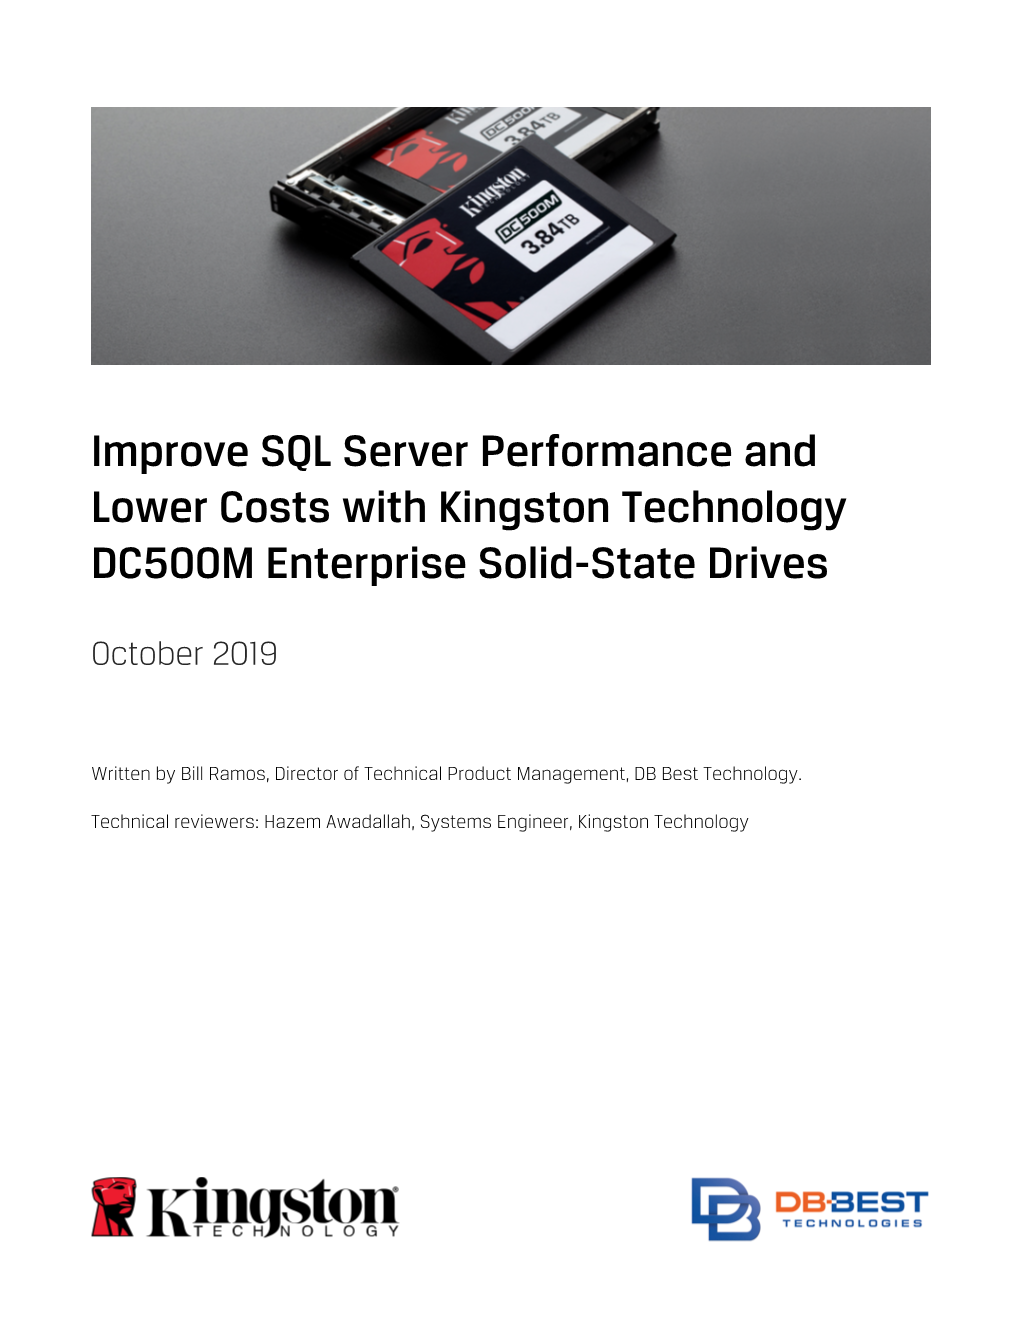 Improve SQL Server Performance and Lower Costs with Kingston Technology DC500M Enterprise Solid-State Drives